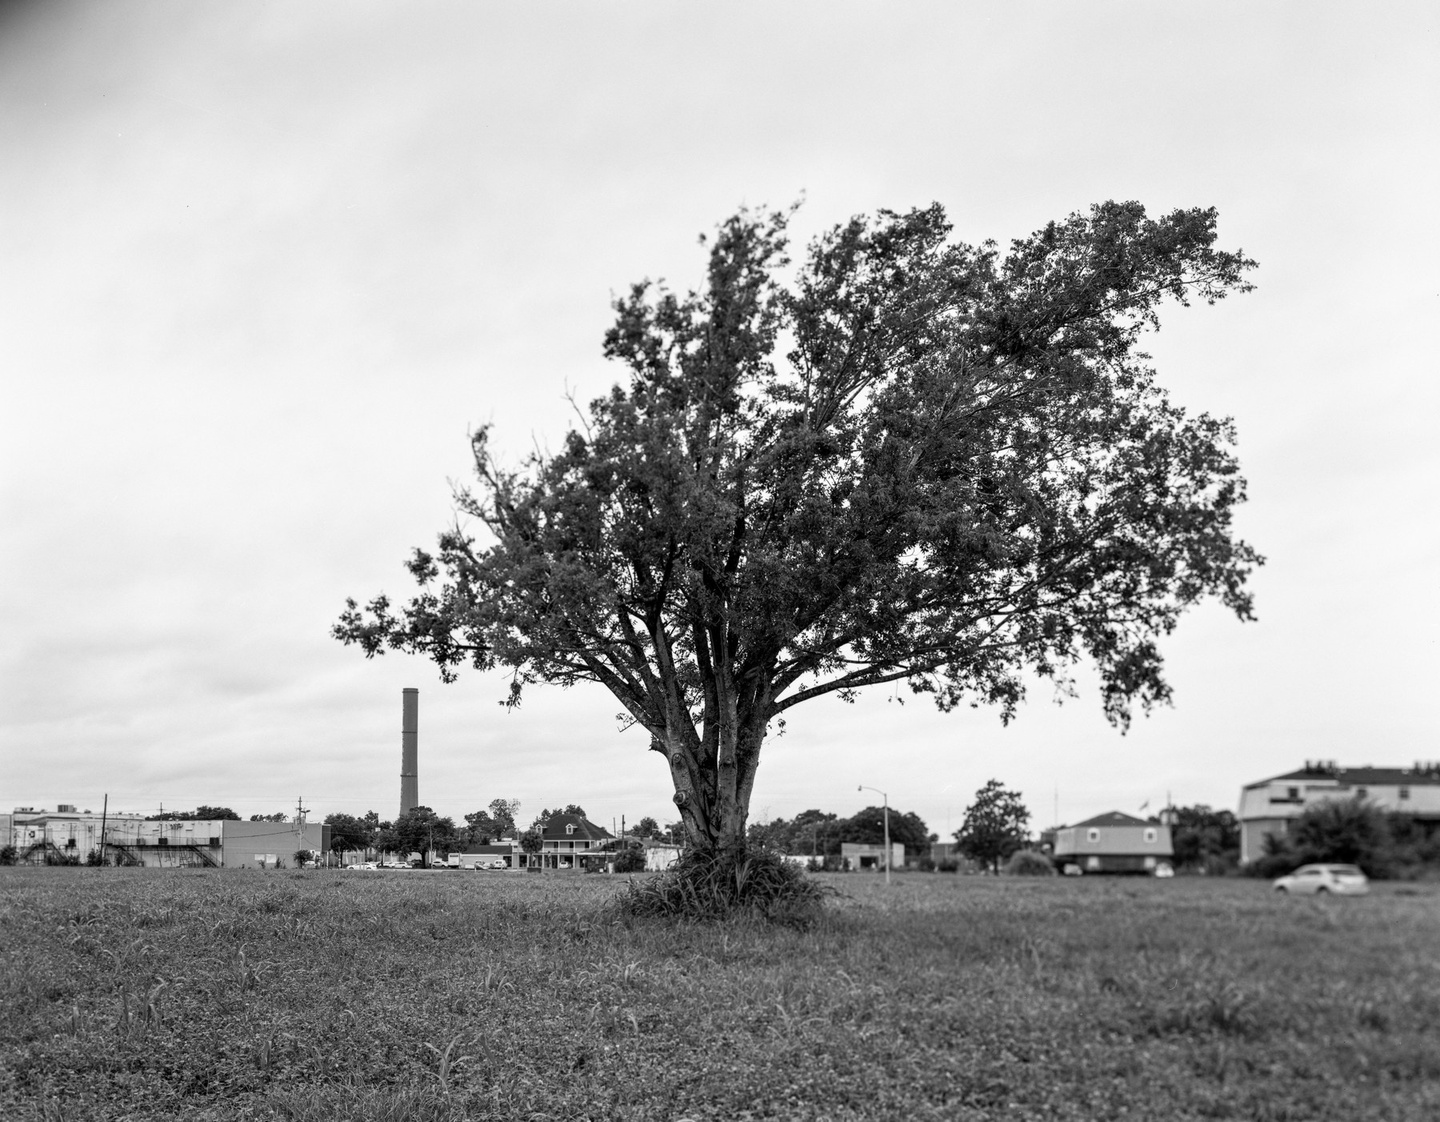 Black and white photograph of a tree in the middle of a field. Houses, cars, and other buildings in the distance.